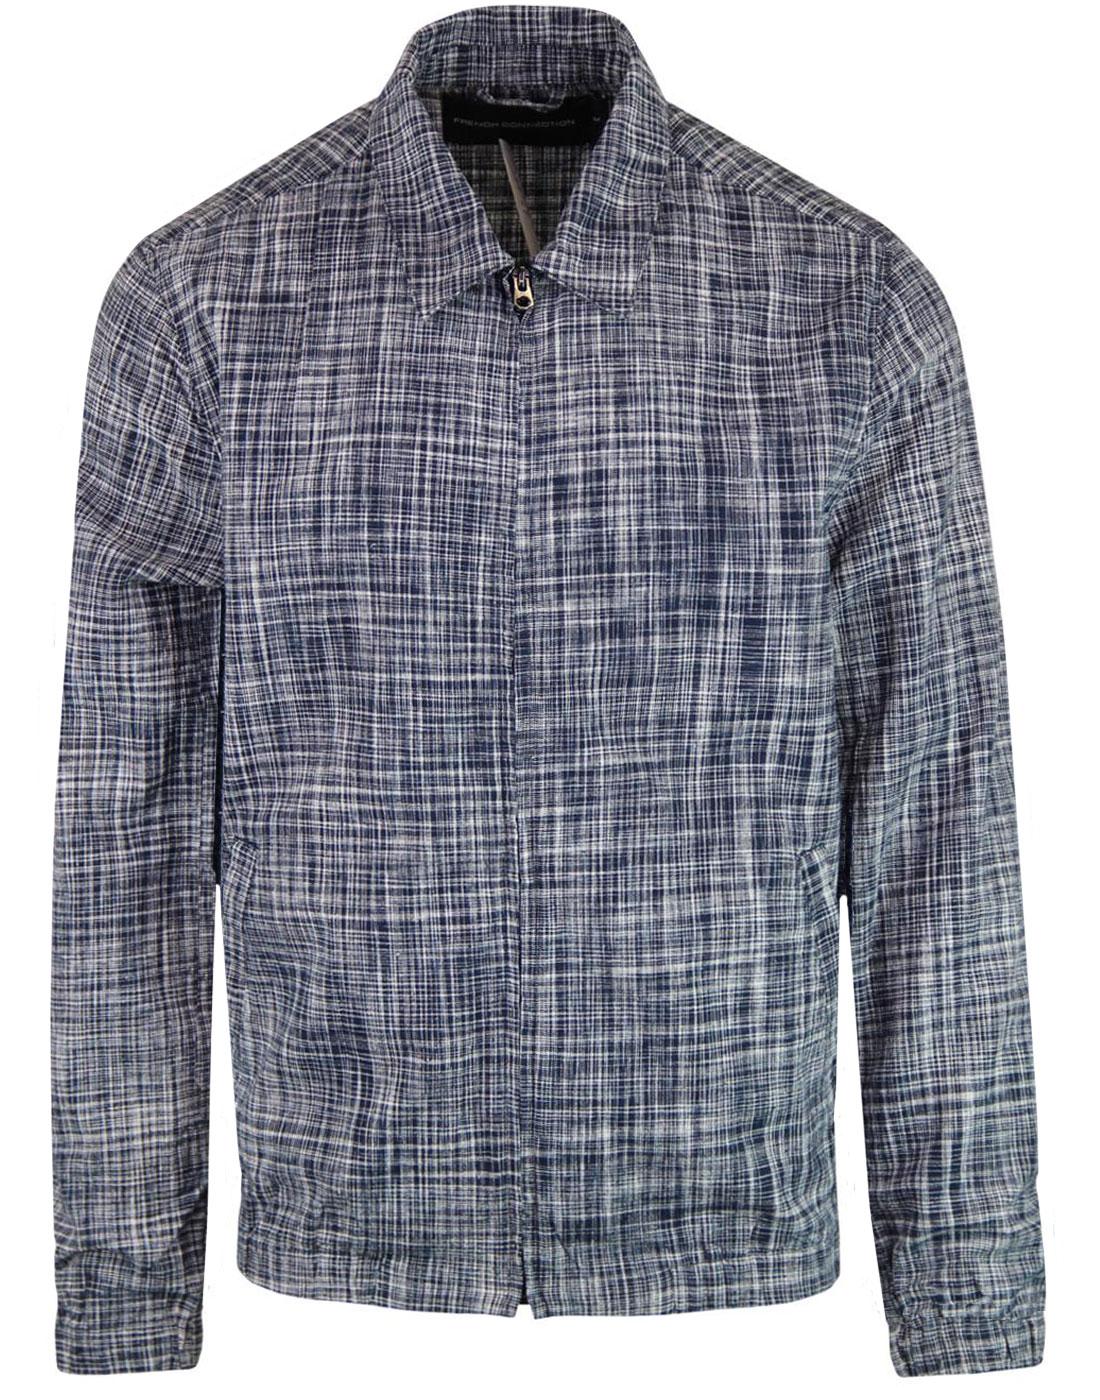 FRENCH CONNECTION Mens Retro Linen Spacedye Jacket